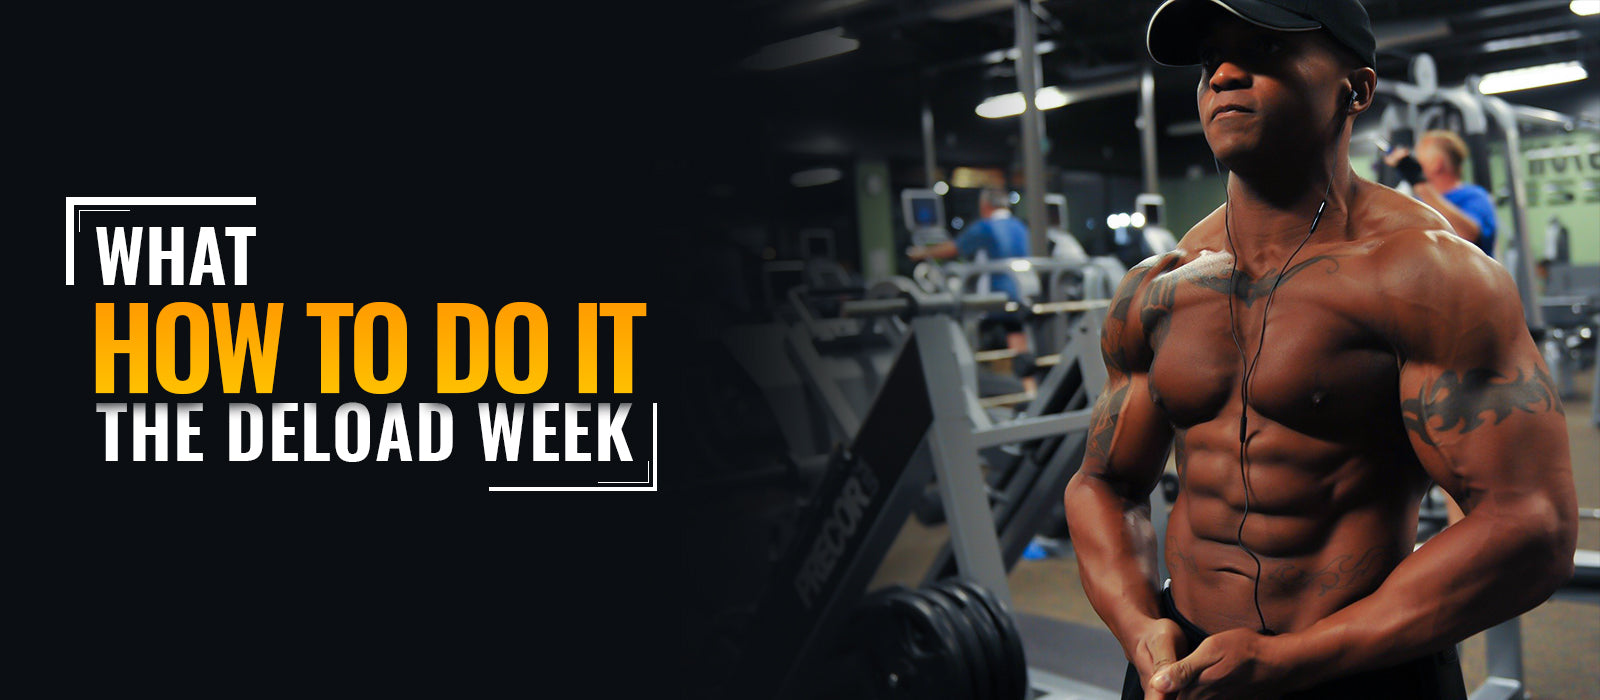 When Should You Take a Deload Week? - Generation Iron Fitness